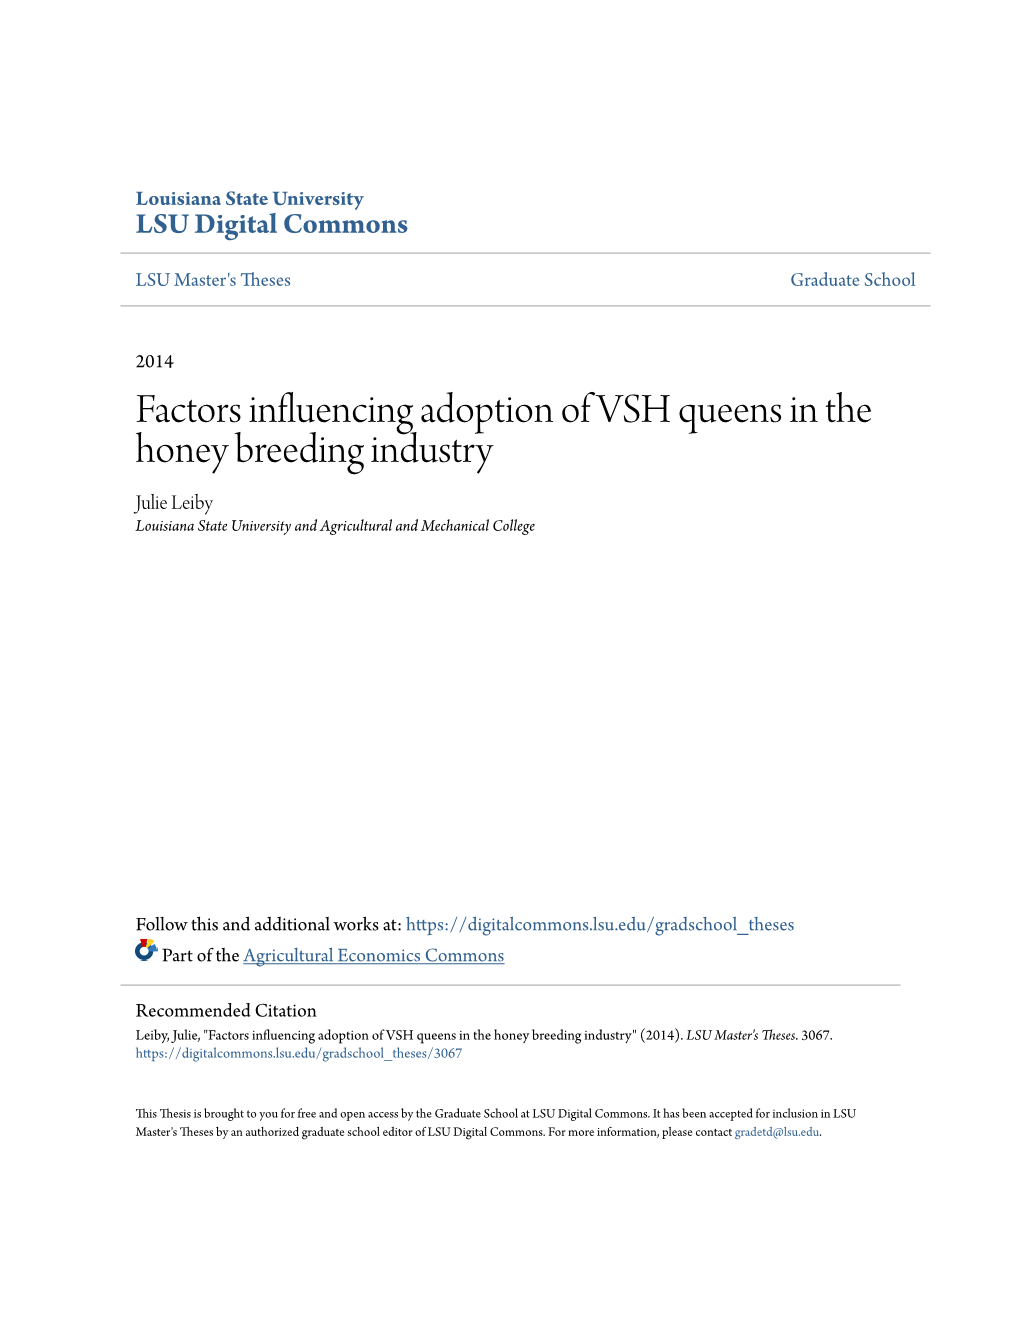 Factors Influencing Adoption of VSH Queens in the Honey Breeding Industry Julie Leiby Louisiana State University and Agricultural and Mechanical College